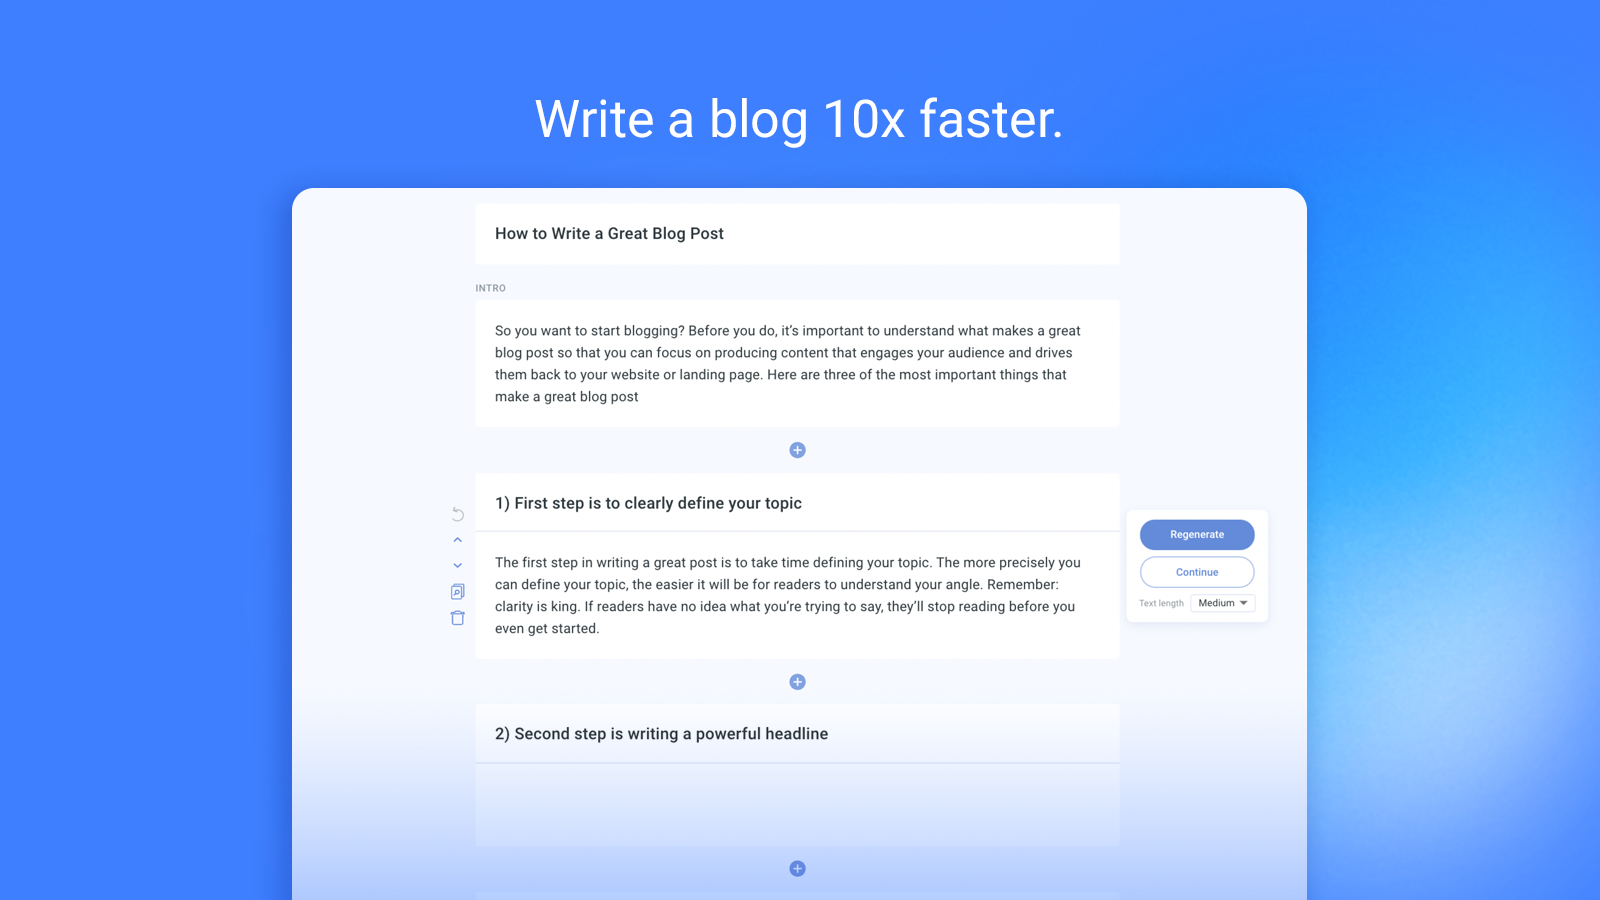 Write a blog 10x faster.